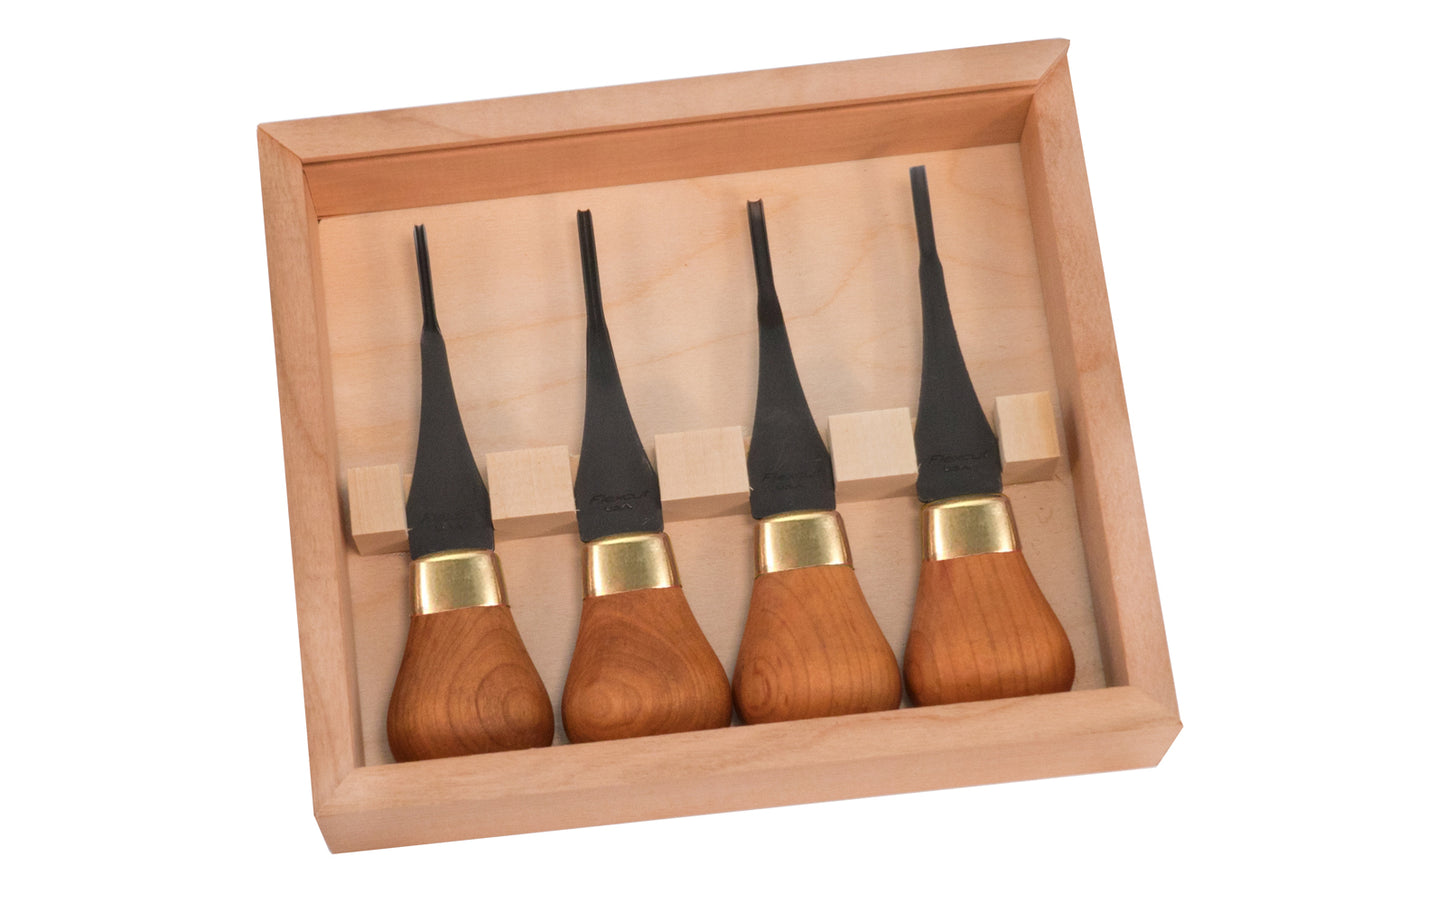 Flexcut Premium Mini Palm Carving Set FRP604 features broad, short knob handles in the European tradition. Handles are cut from fine cherry wood with a polished brass ferrule for strength & long working life. Set comes in its own cherry box with a lid. High Carbon Steel cutting edges are hand honed & polished. Made in USA ~ 651646016049